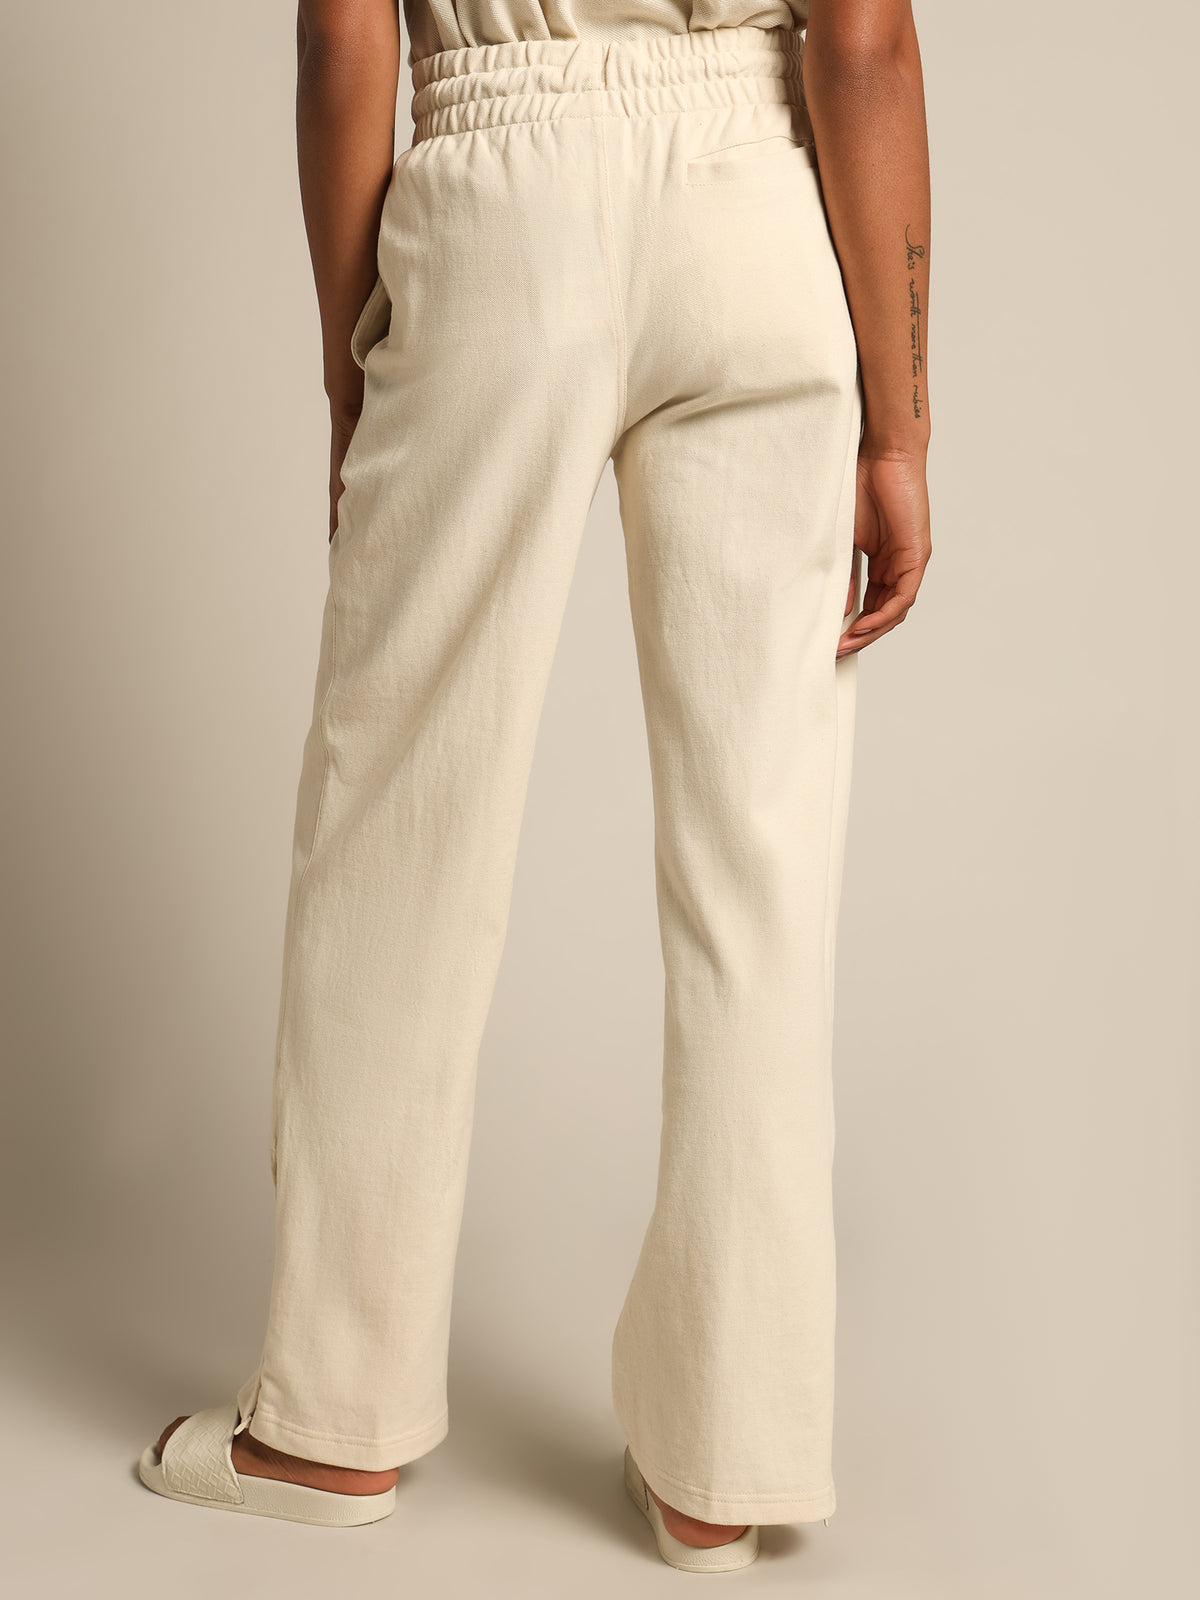 Re:bound Pique Track Pants in Natural